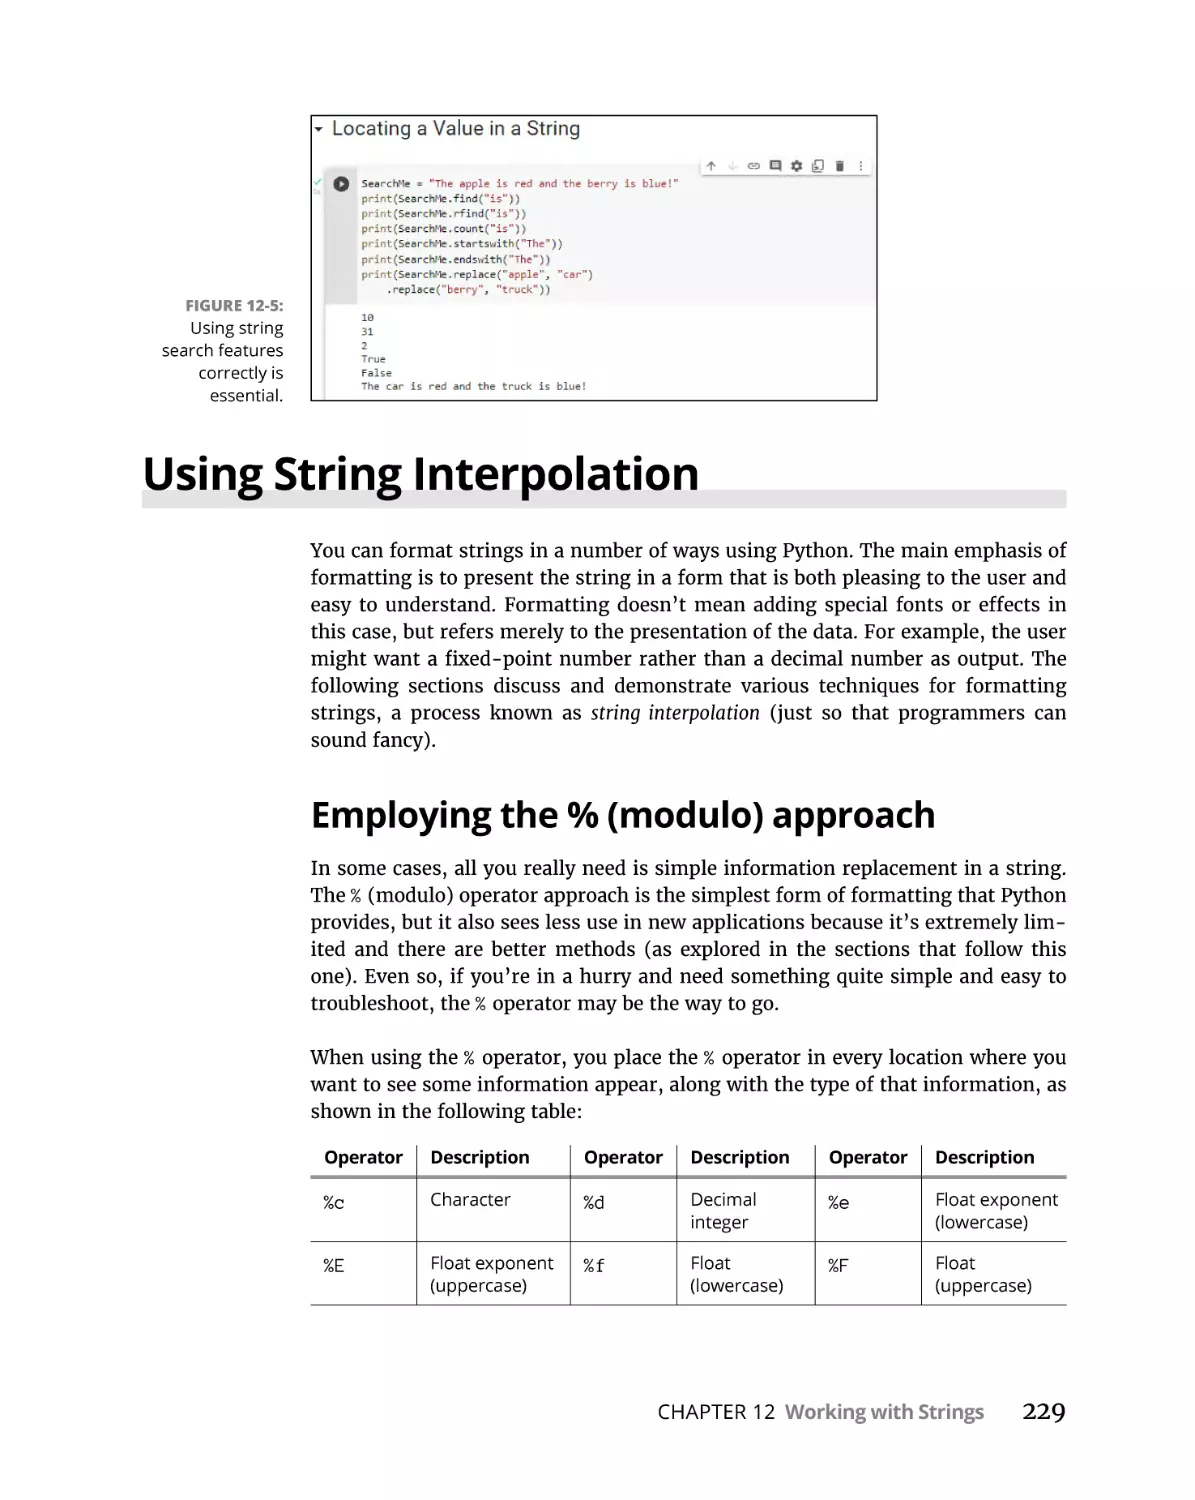 Using String Interpolation
Employing the % (modulo) approach